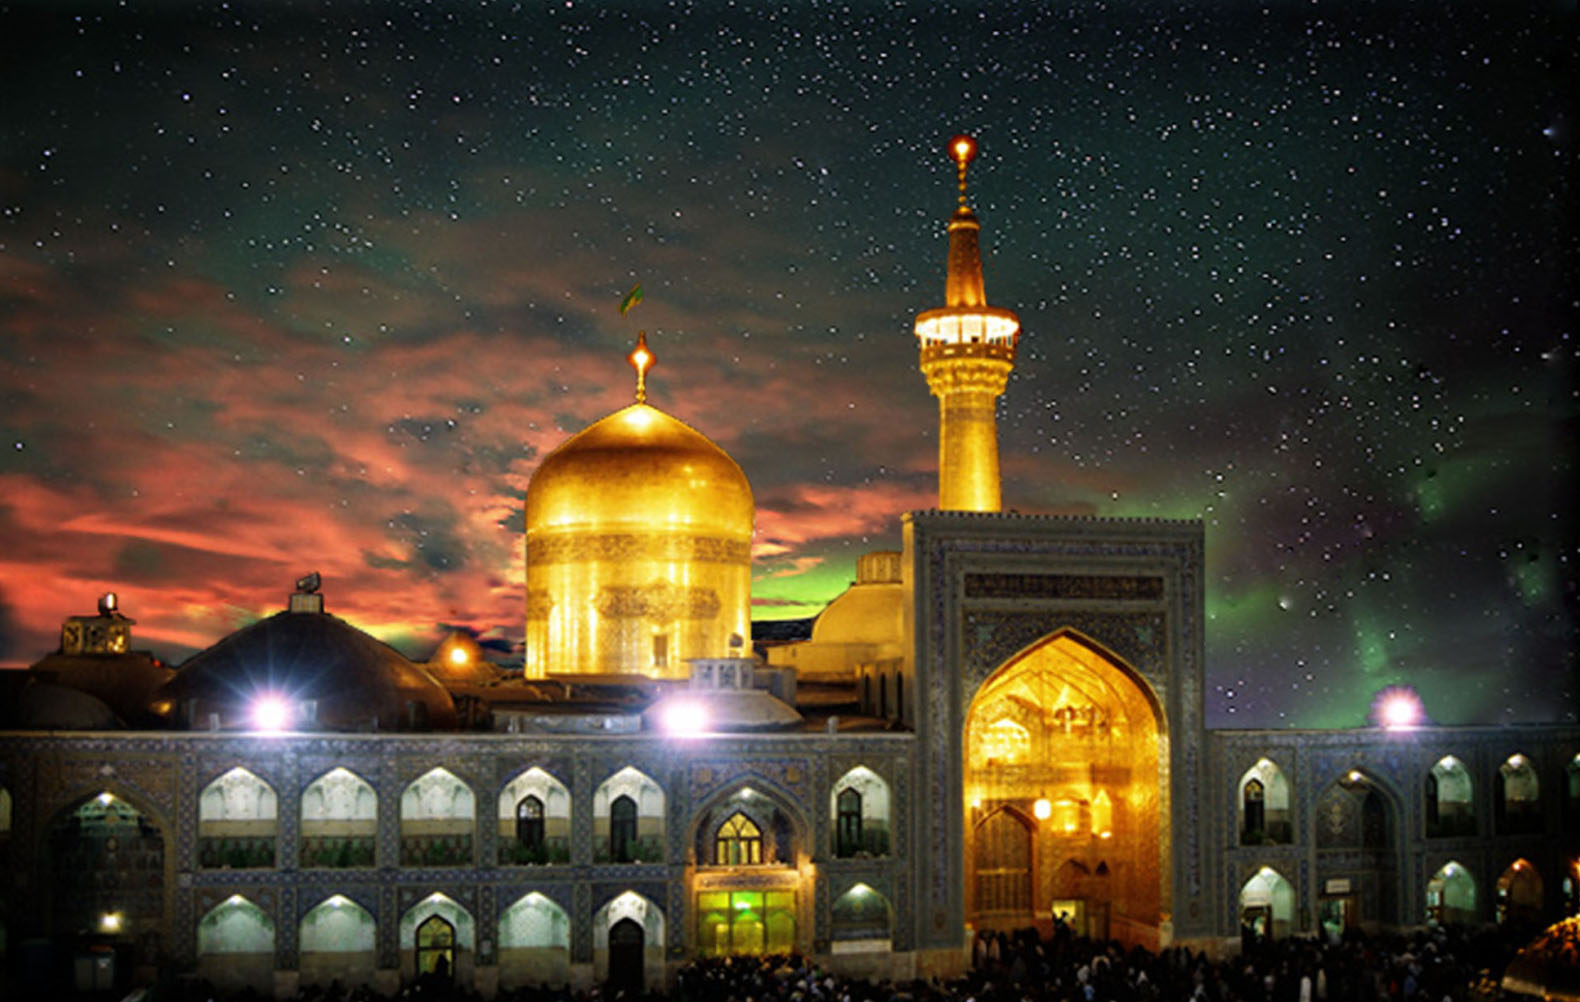 A Travel guide to Mashhad